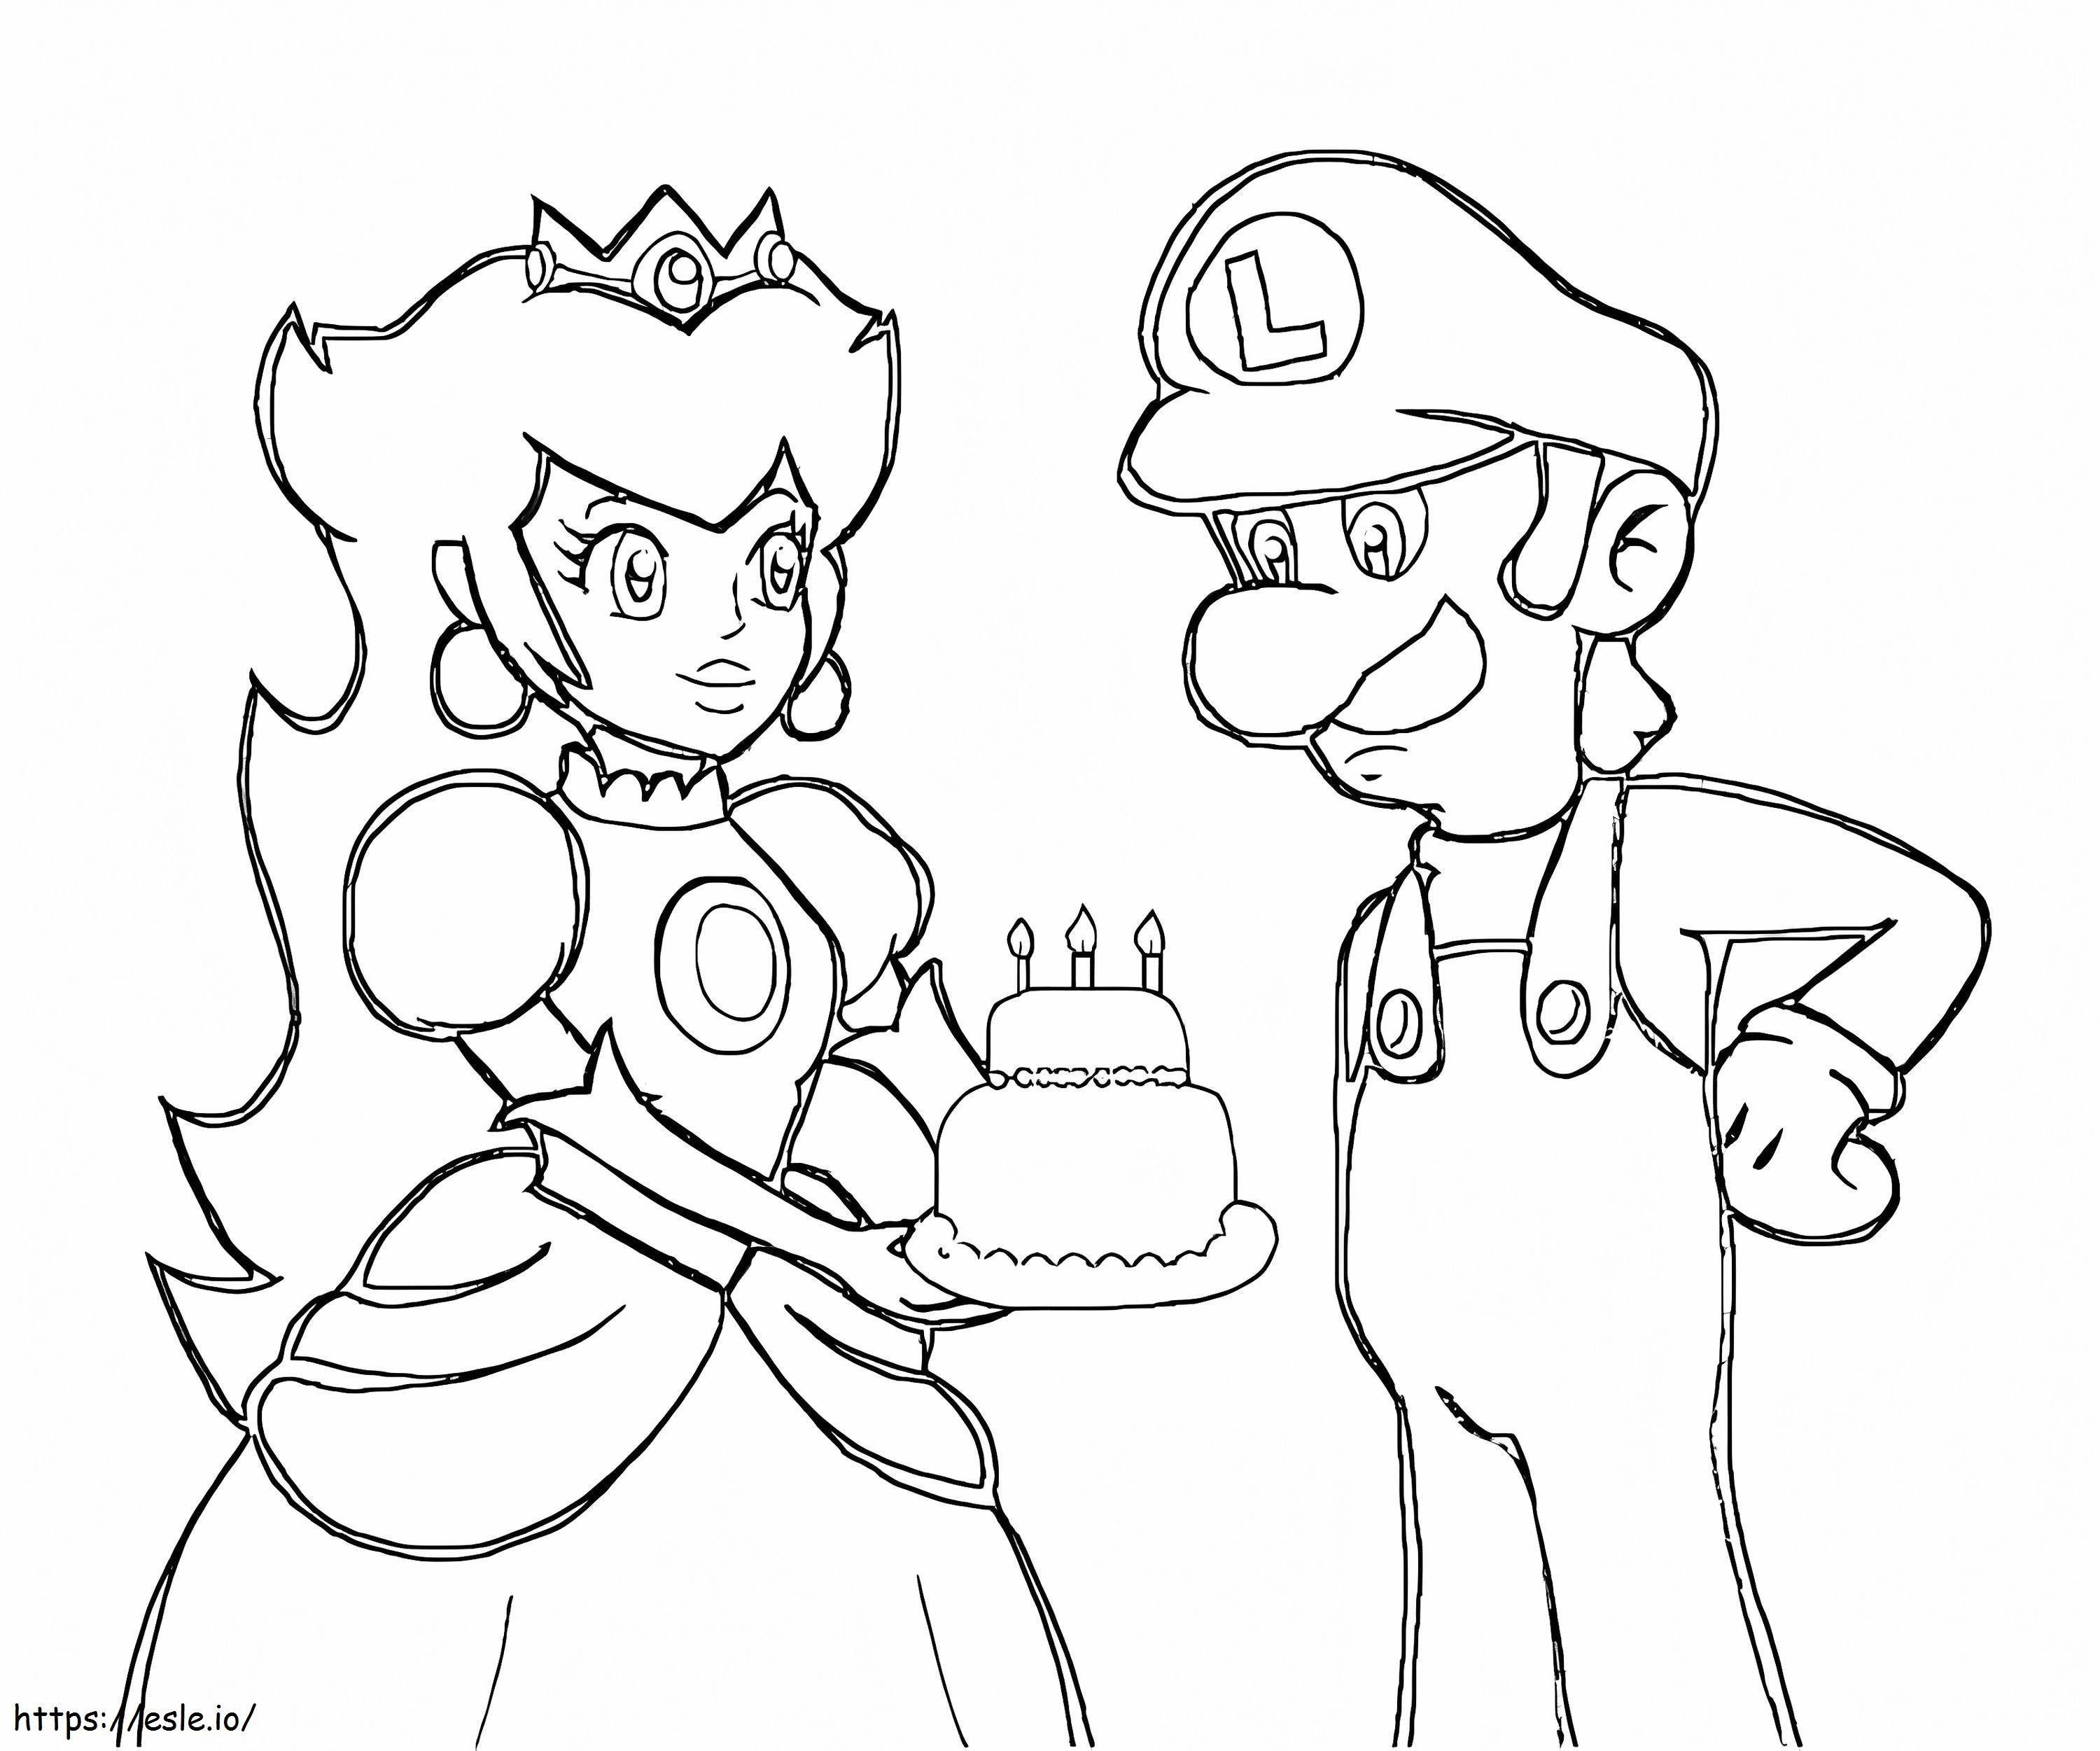 Drawing Peach With Birthday Cake And Luigi coloring page